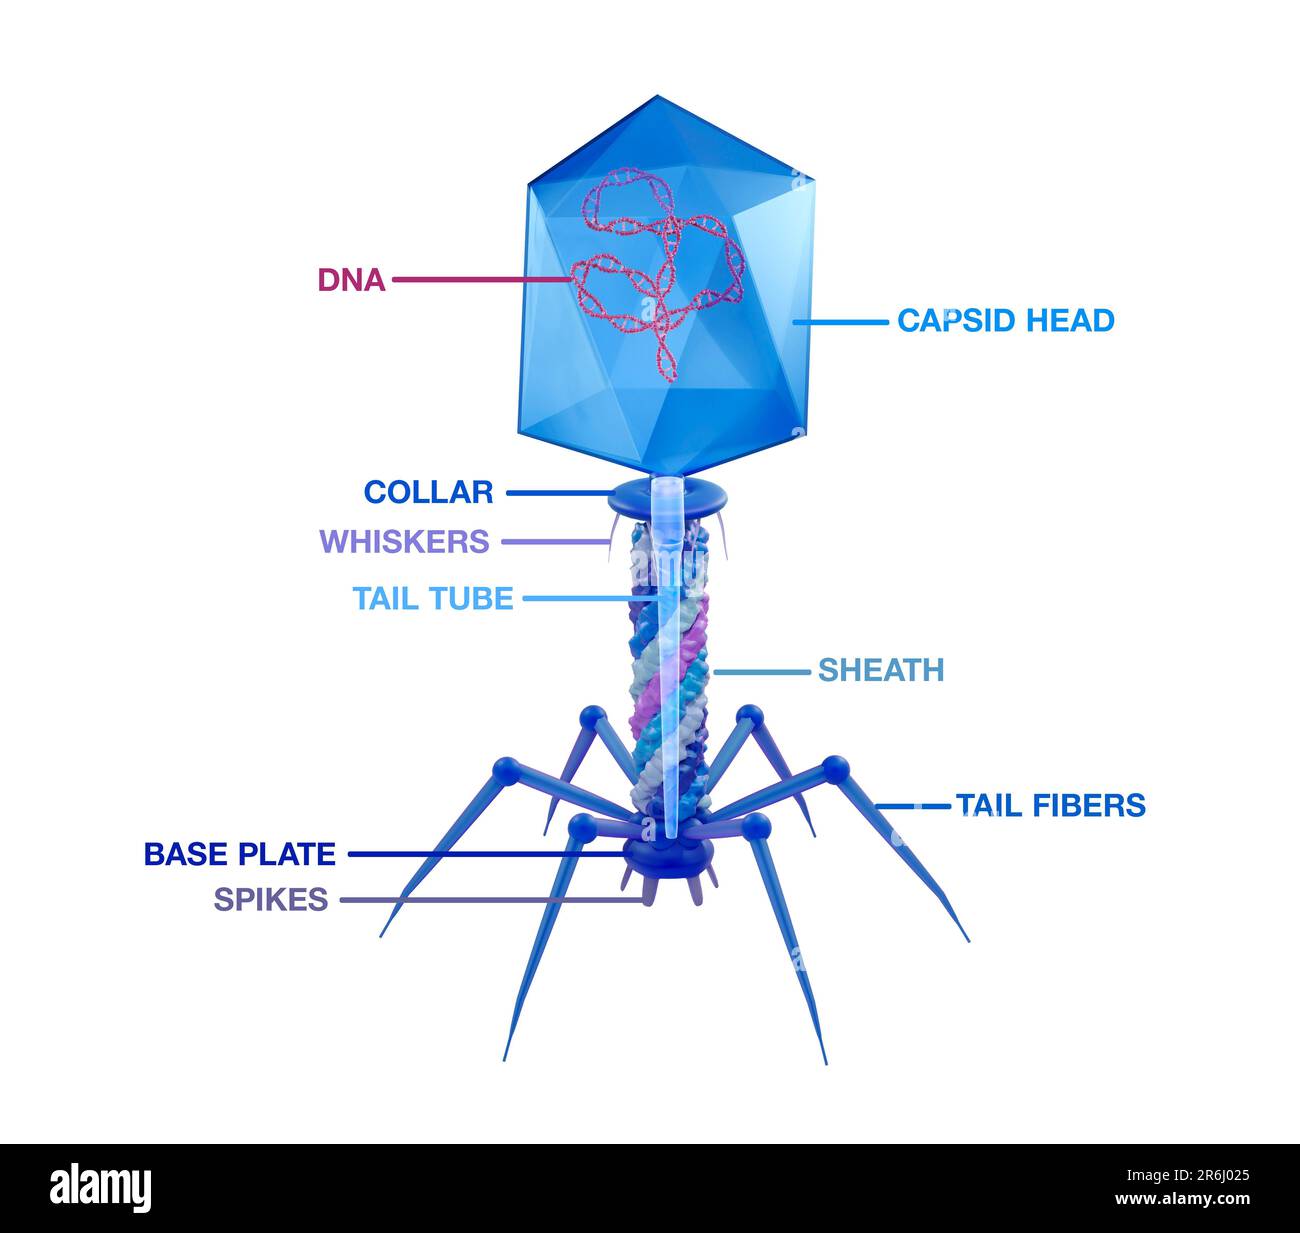 T4 bacteriophage structure, illustration Stock Photo